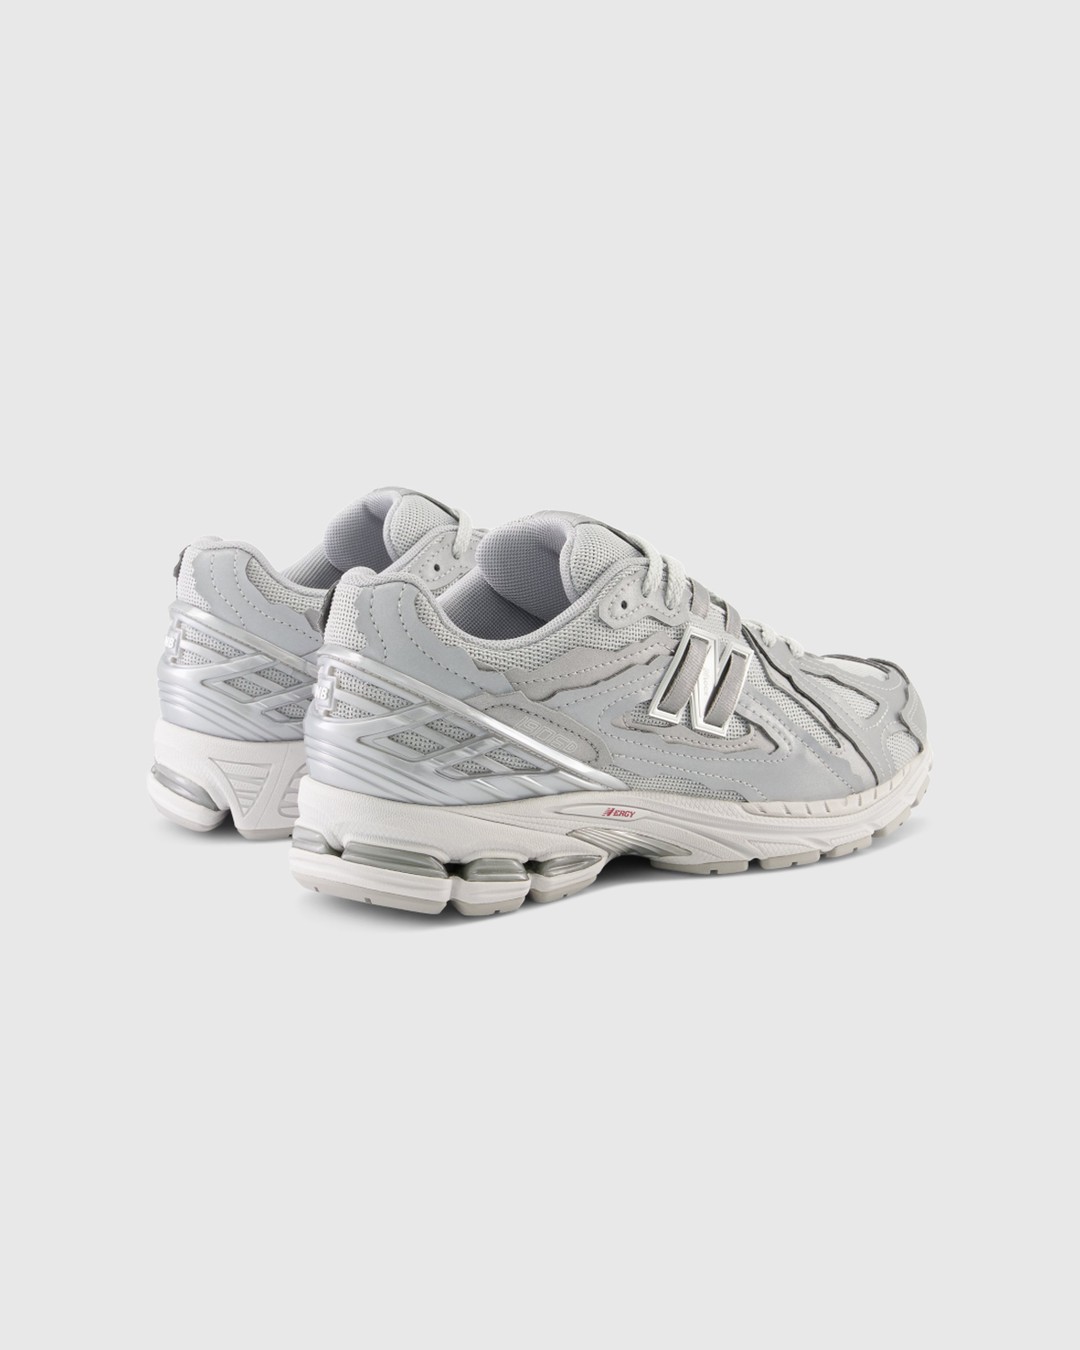 New Balance – 1906 DH Silver Metallic - Sneakers - Silver - Image 3